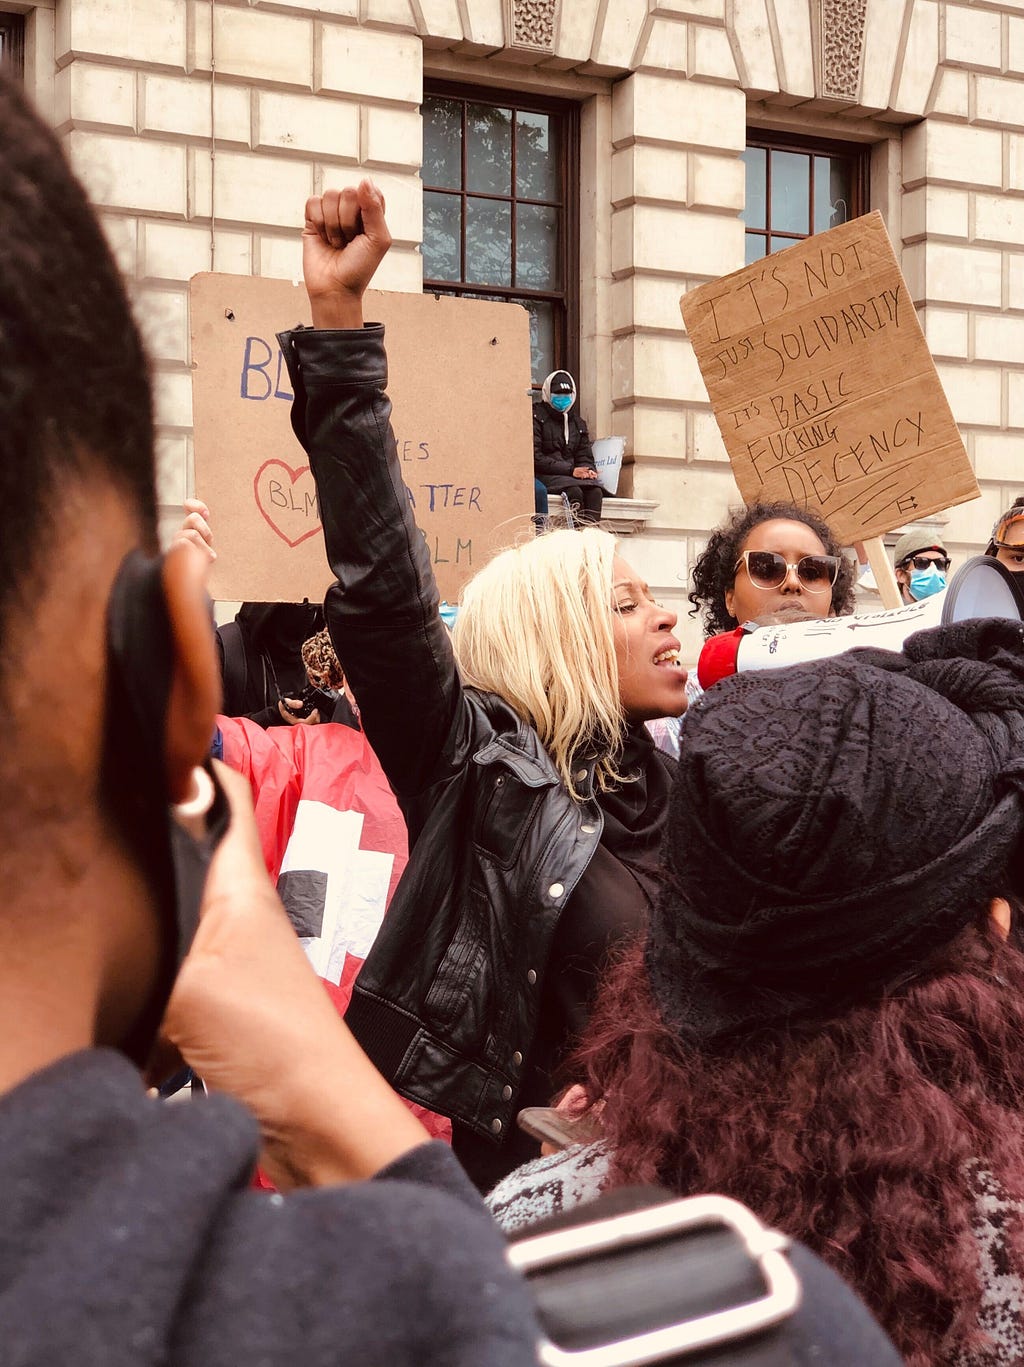 Black woman speaking into a megaphone at a protest and a sign in the back that says “…it’s basic fucking decency”